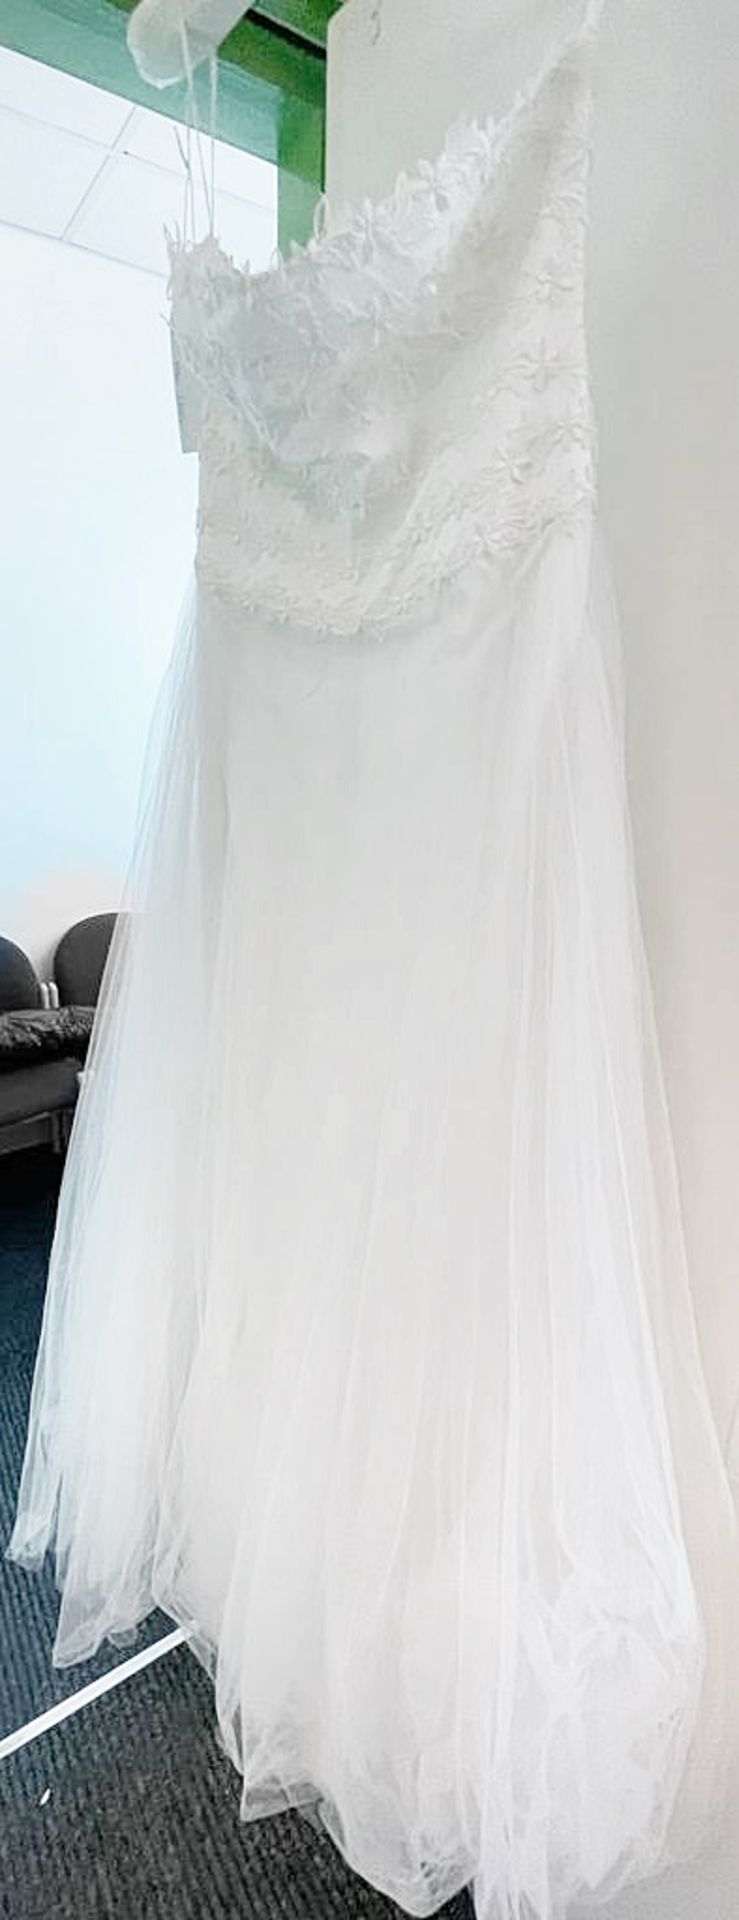 1 x DAVID FIELDEN Strapless Fit And Flare Designer Wedding Dress Bridal Gown, With Lace Top And - Image 3 of 7